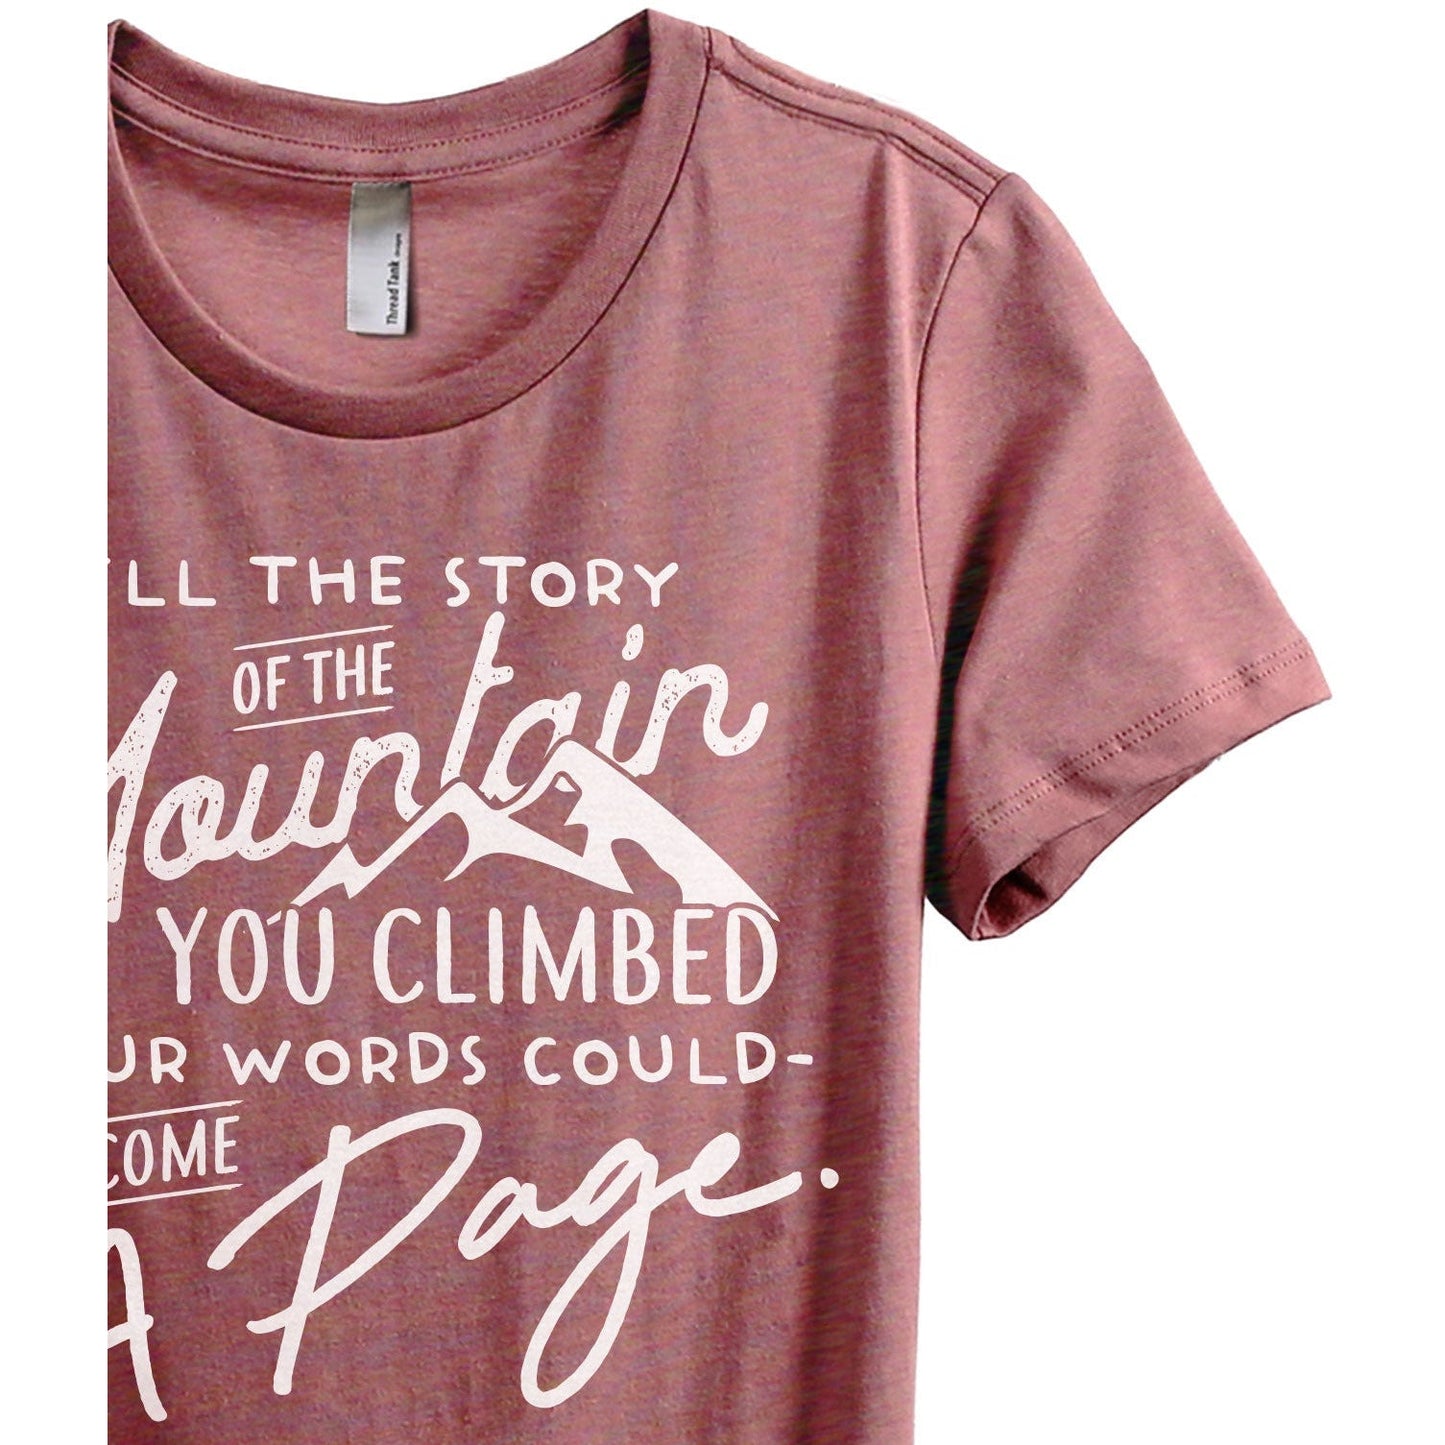 Tell The Story Of The Mountain You Climbed - Stories You Can Wear